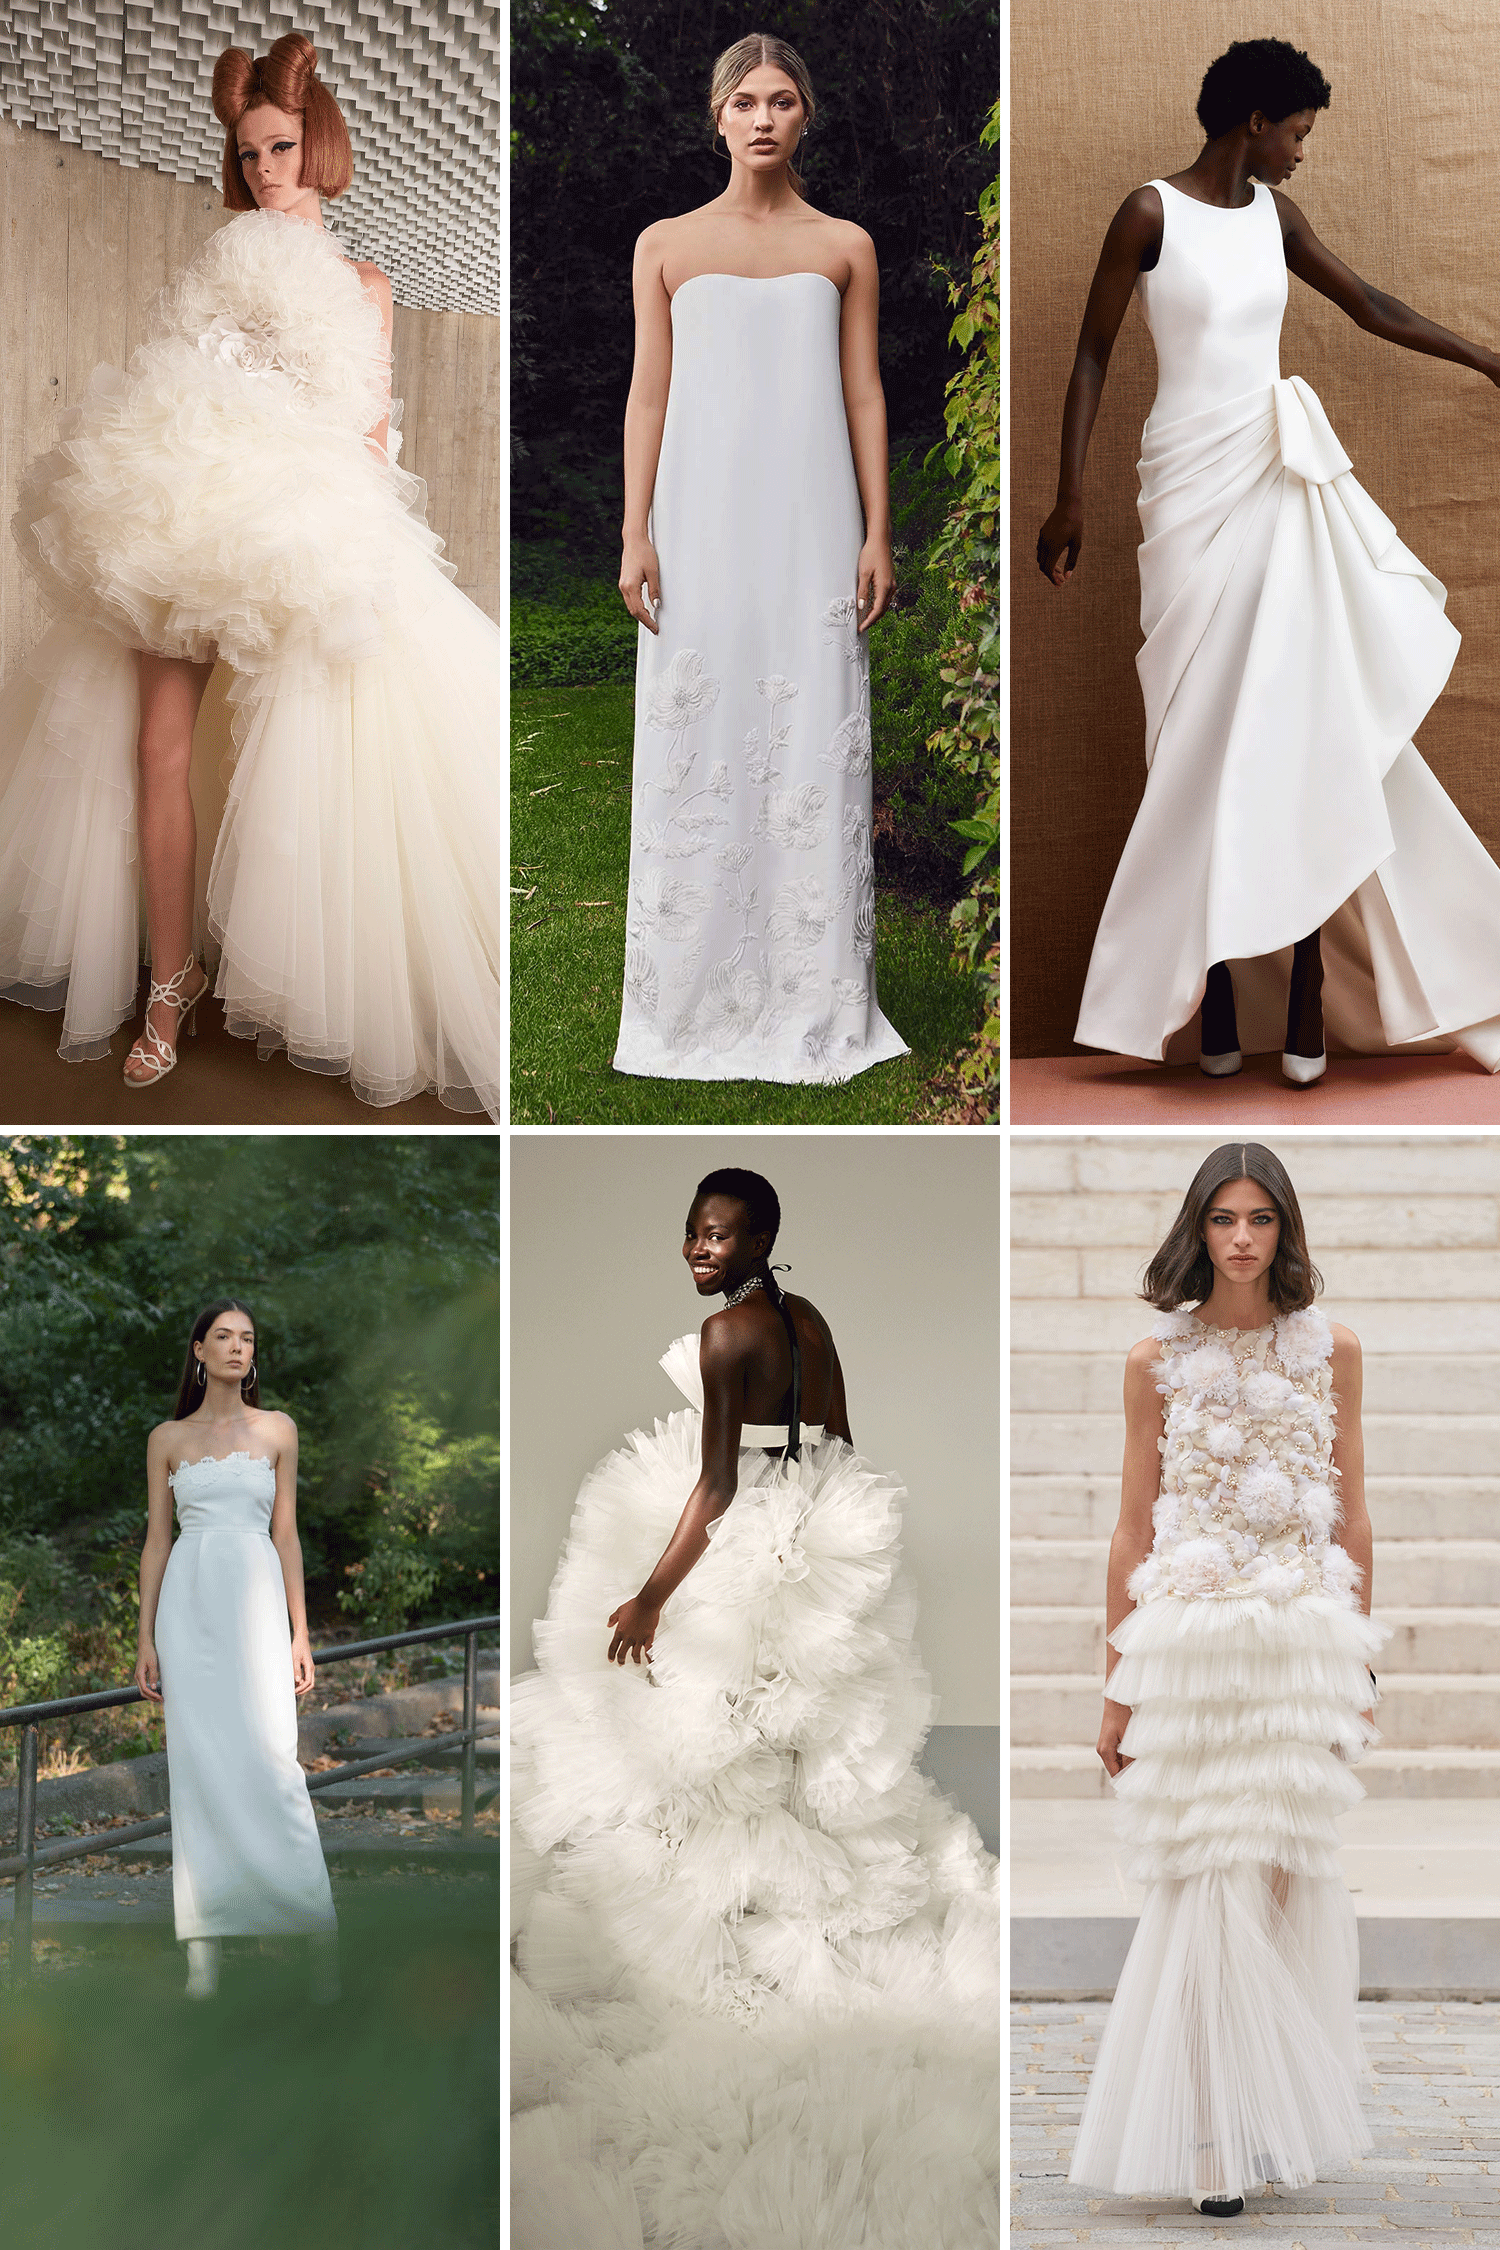 The biggest bridal style trend in 2022? Whatever you please